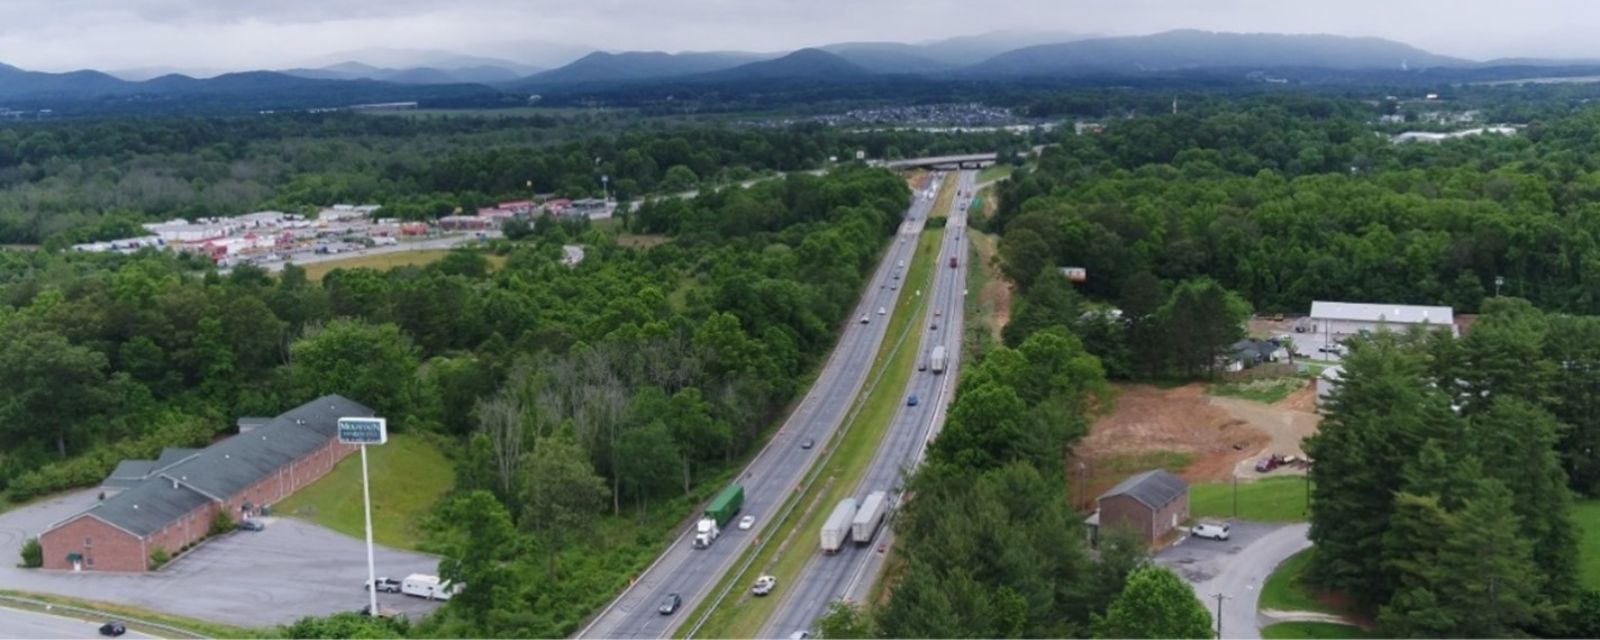 Aerial view of I-26 widening project in North Carolina.